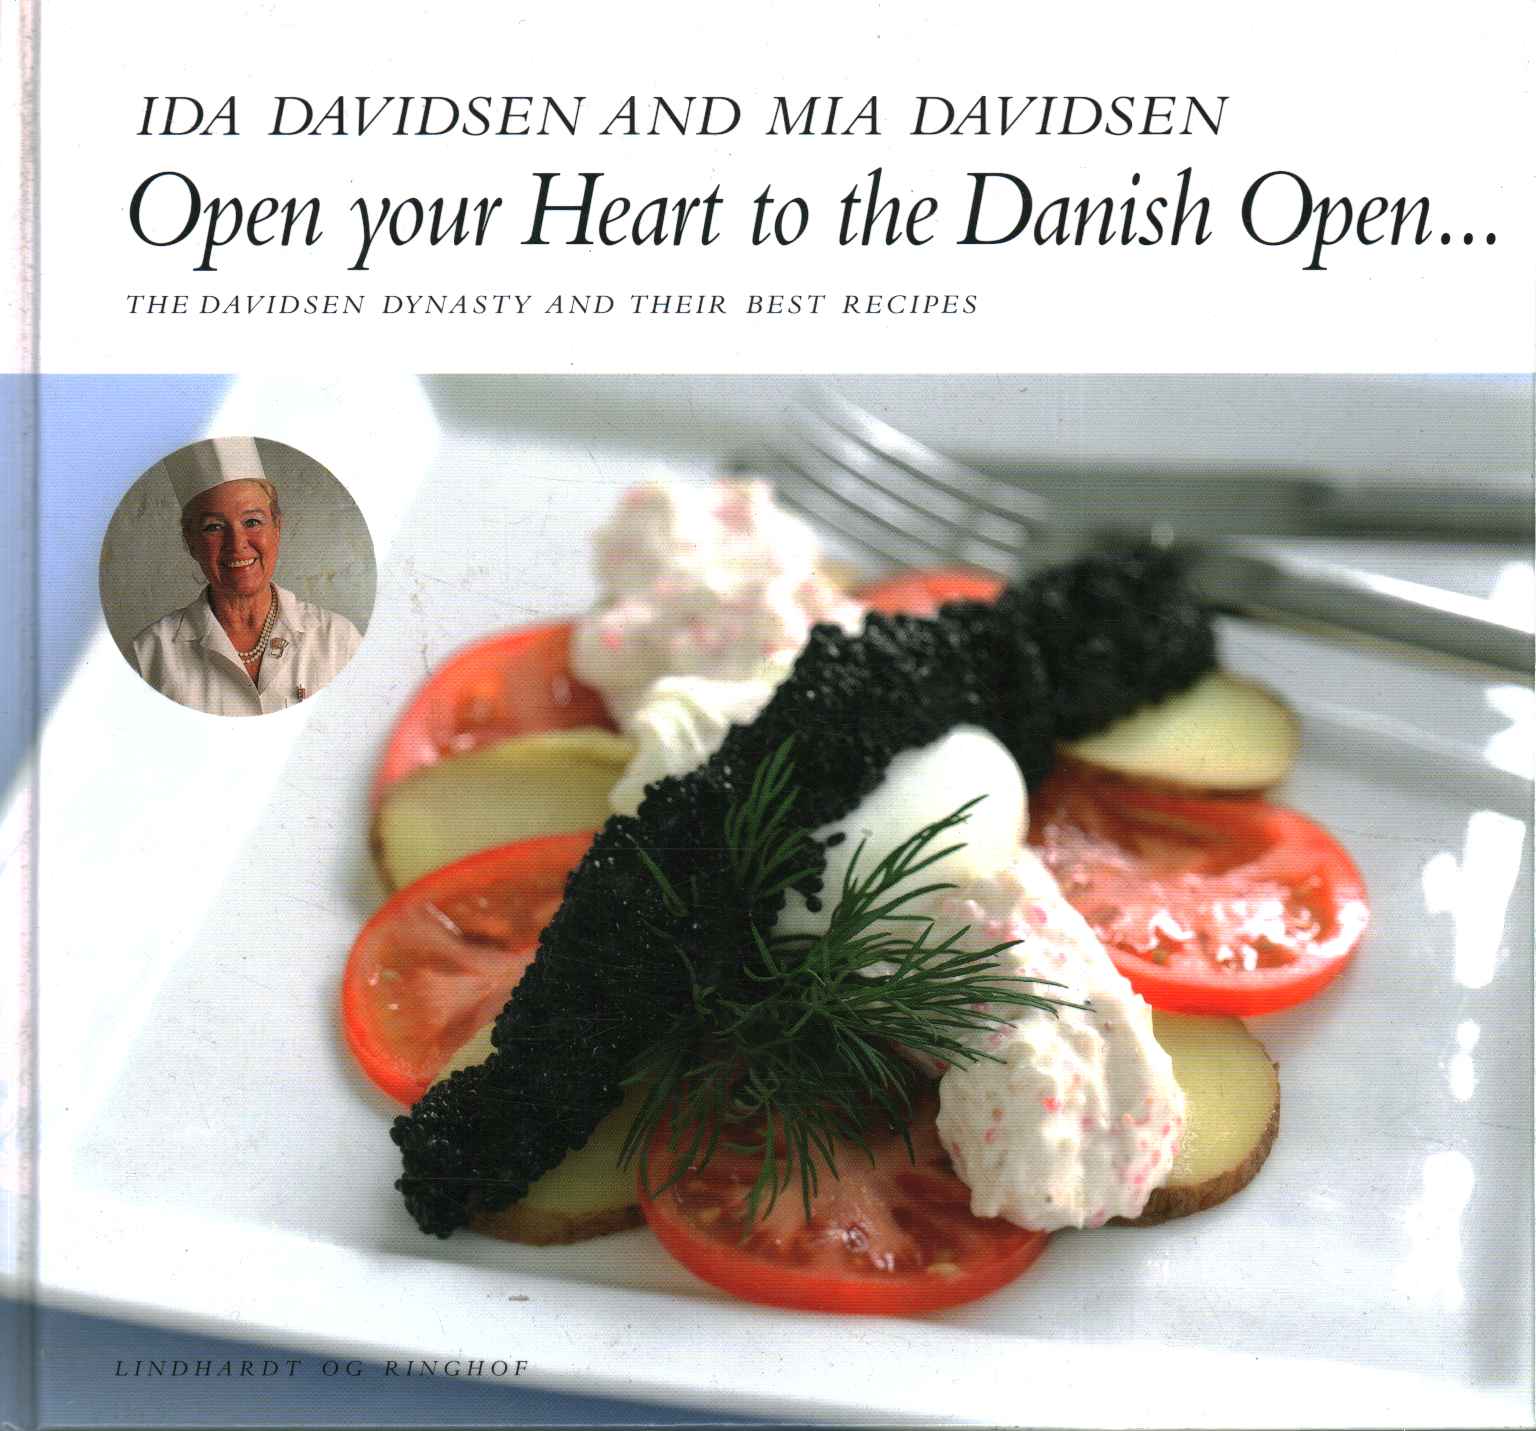 Open your Heart to the Danish Open.